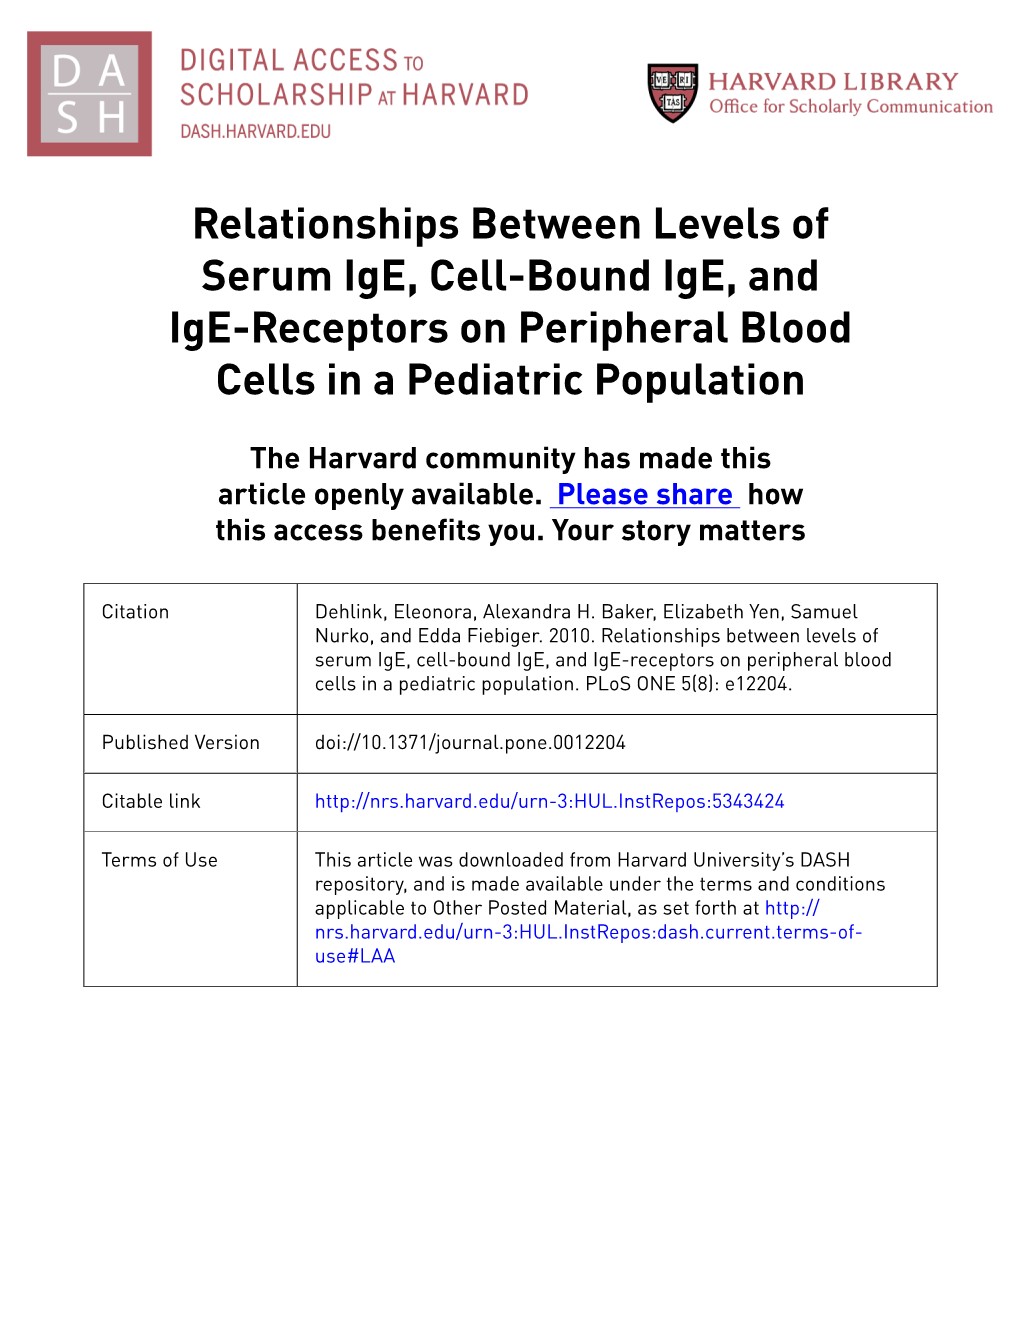 Relationships Between Levels of Serum Ige, Cell-Bound Ige, and Ige-Receptors on Peripheral Blood Cells in a Pediatric Population